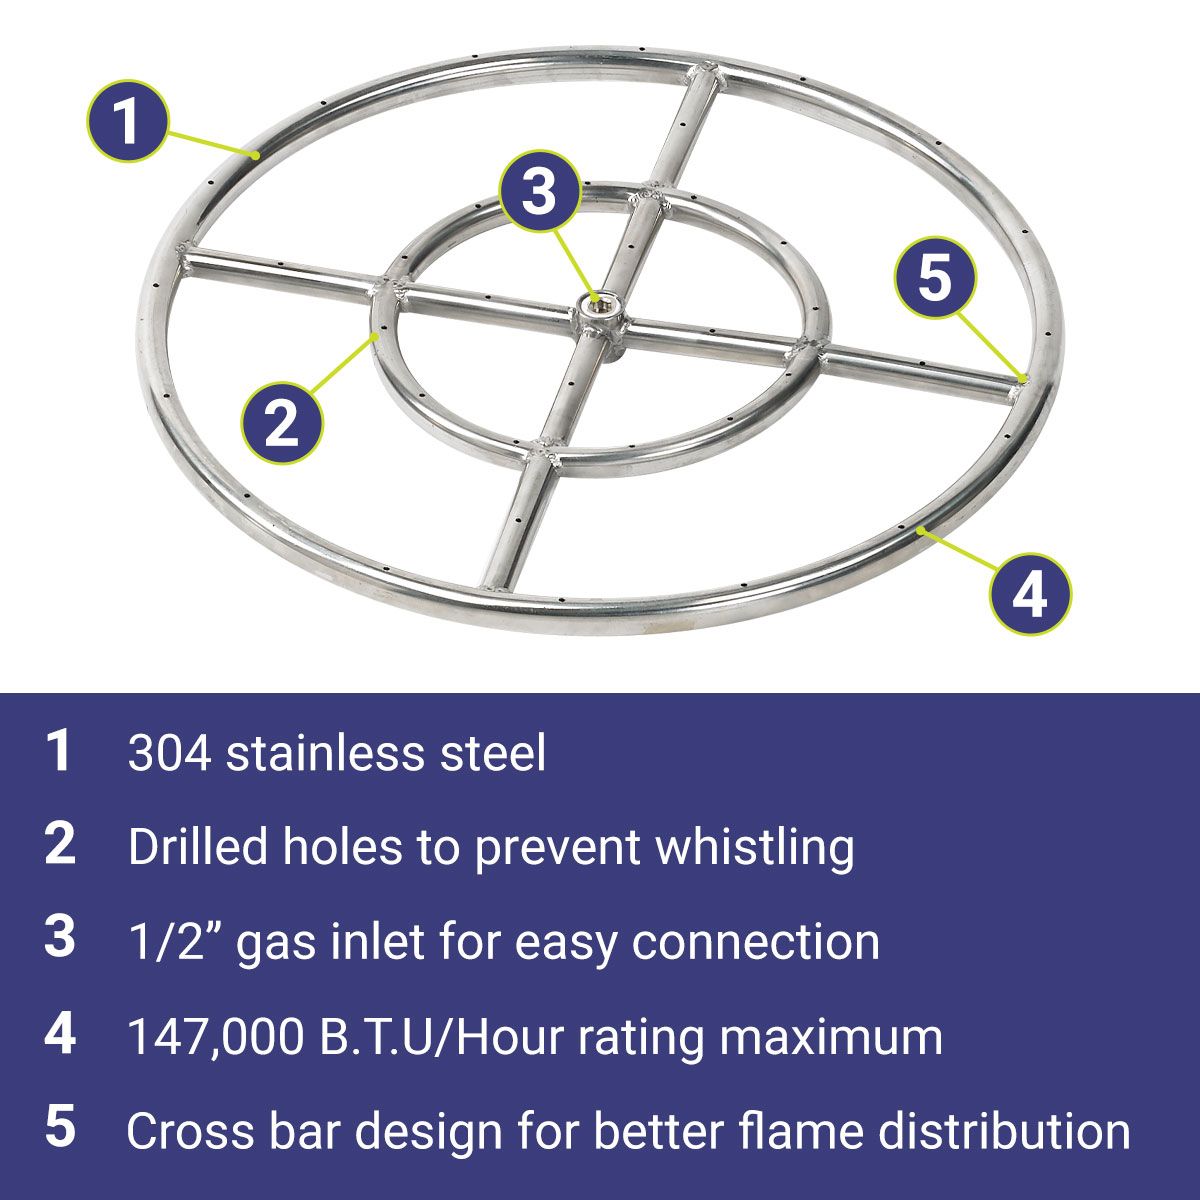 Double-Ring Stainless Steel Burner with a 1/2" Inlet by American Fire glass